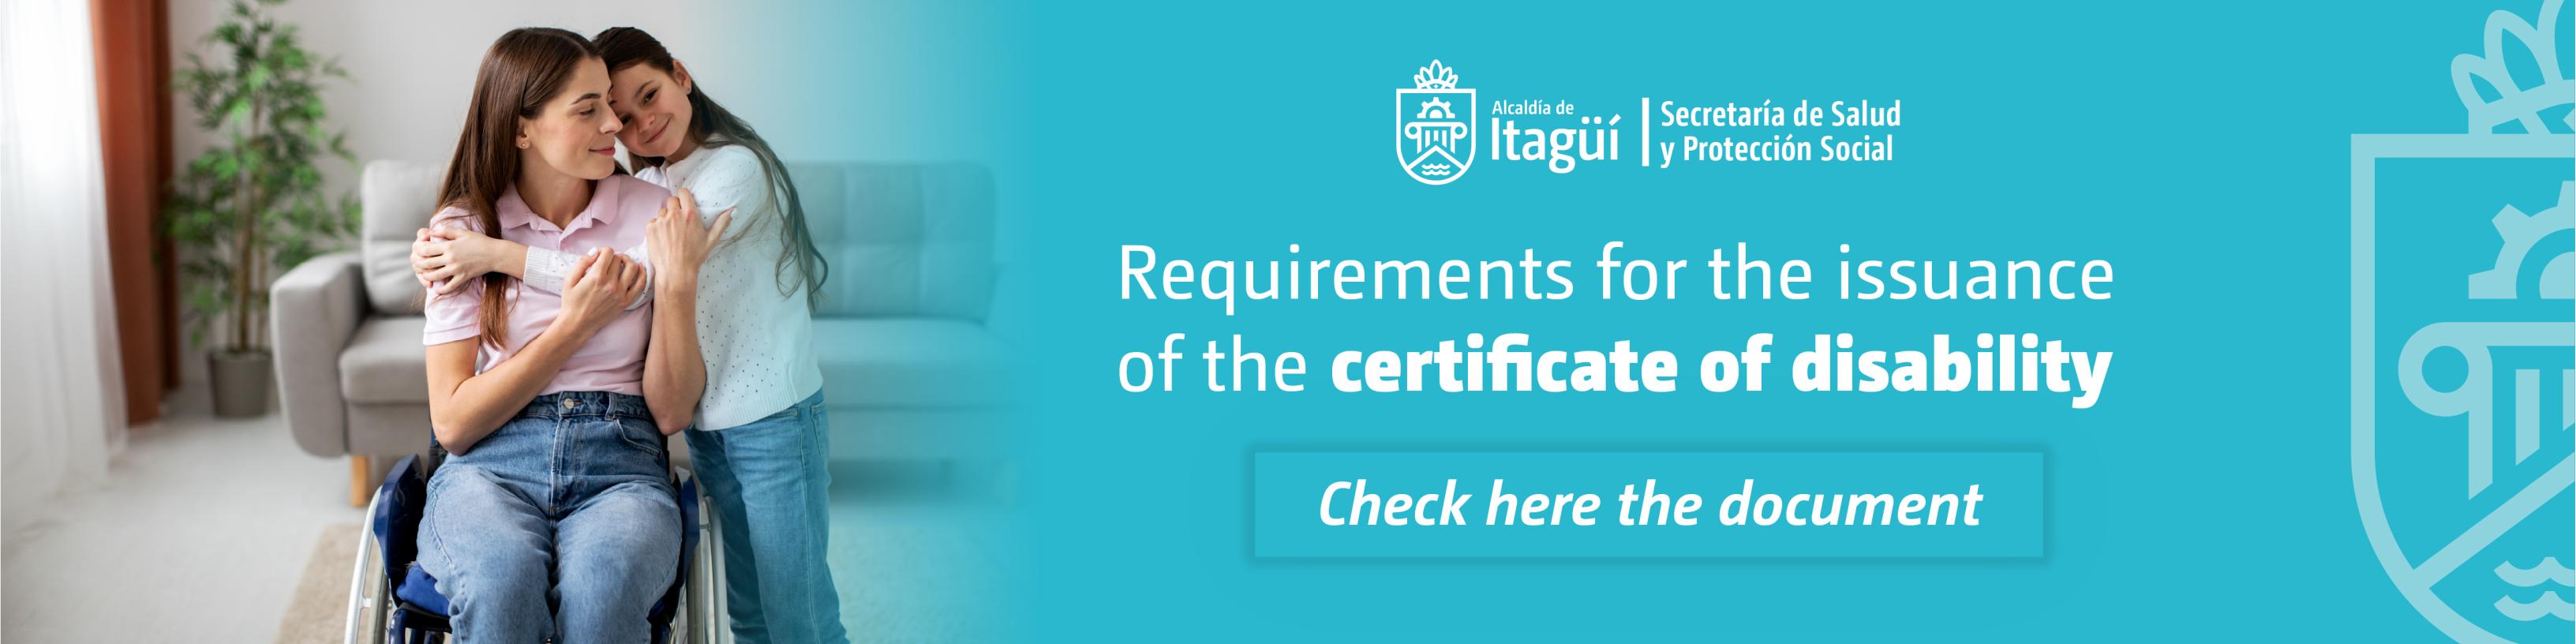 Requirements to obtain the certificate of disability, find the document here